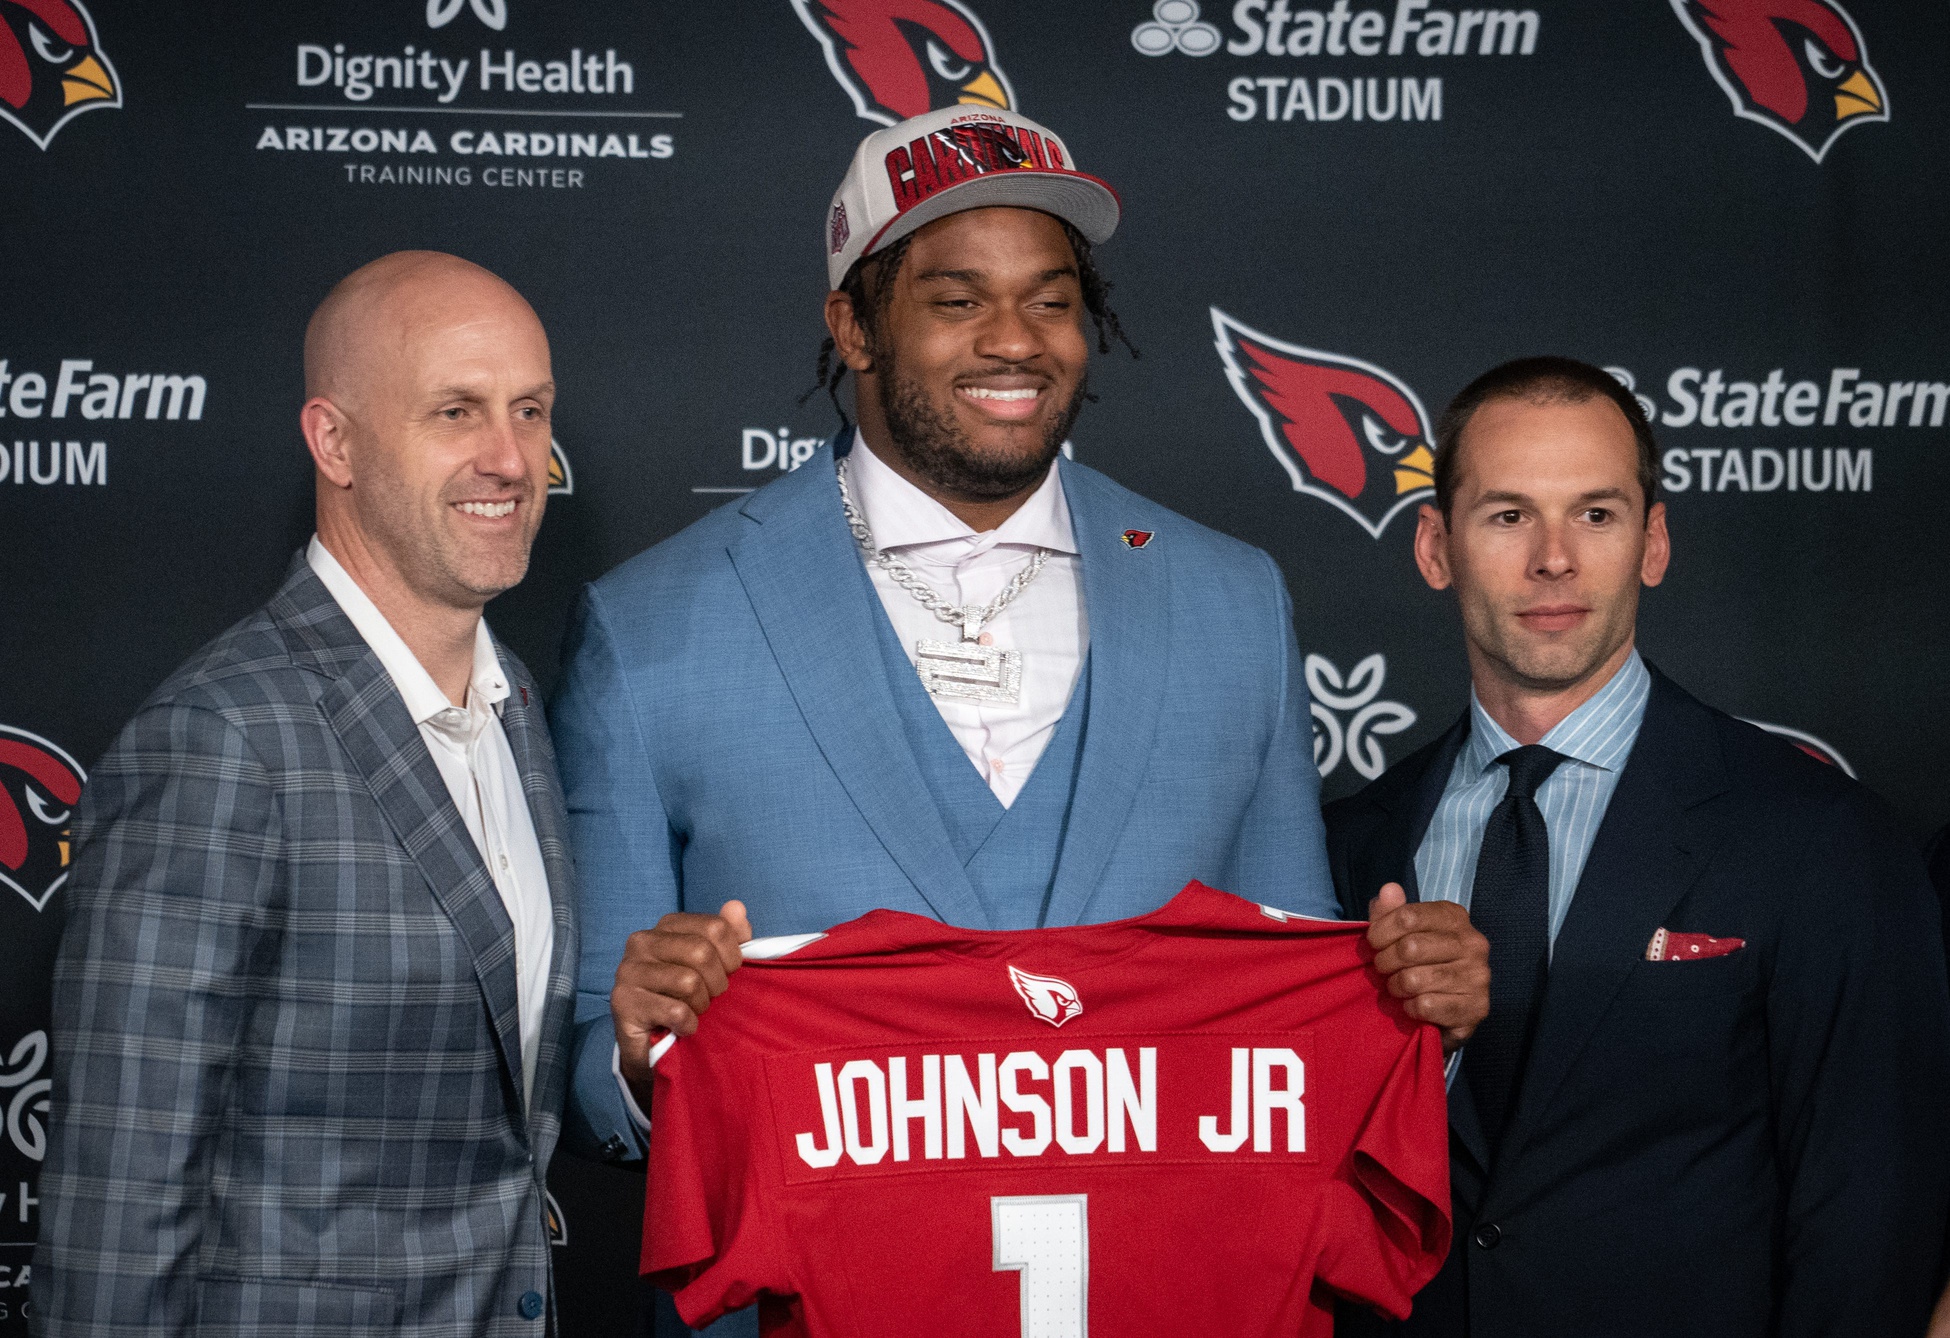 Arizona Cardinals will have the third pick in the 2023 NFL Draft